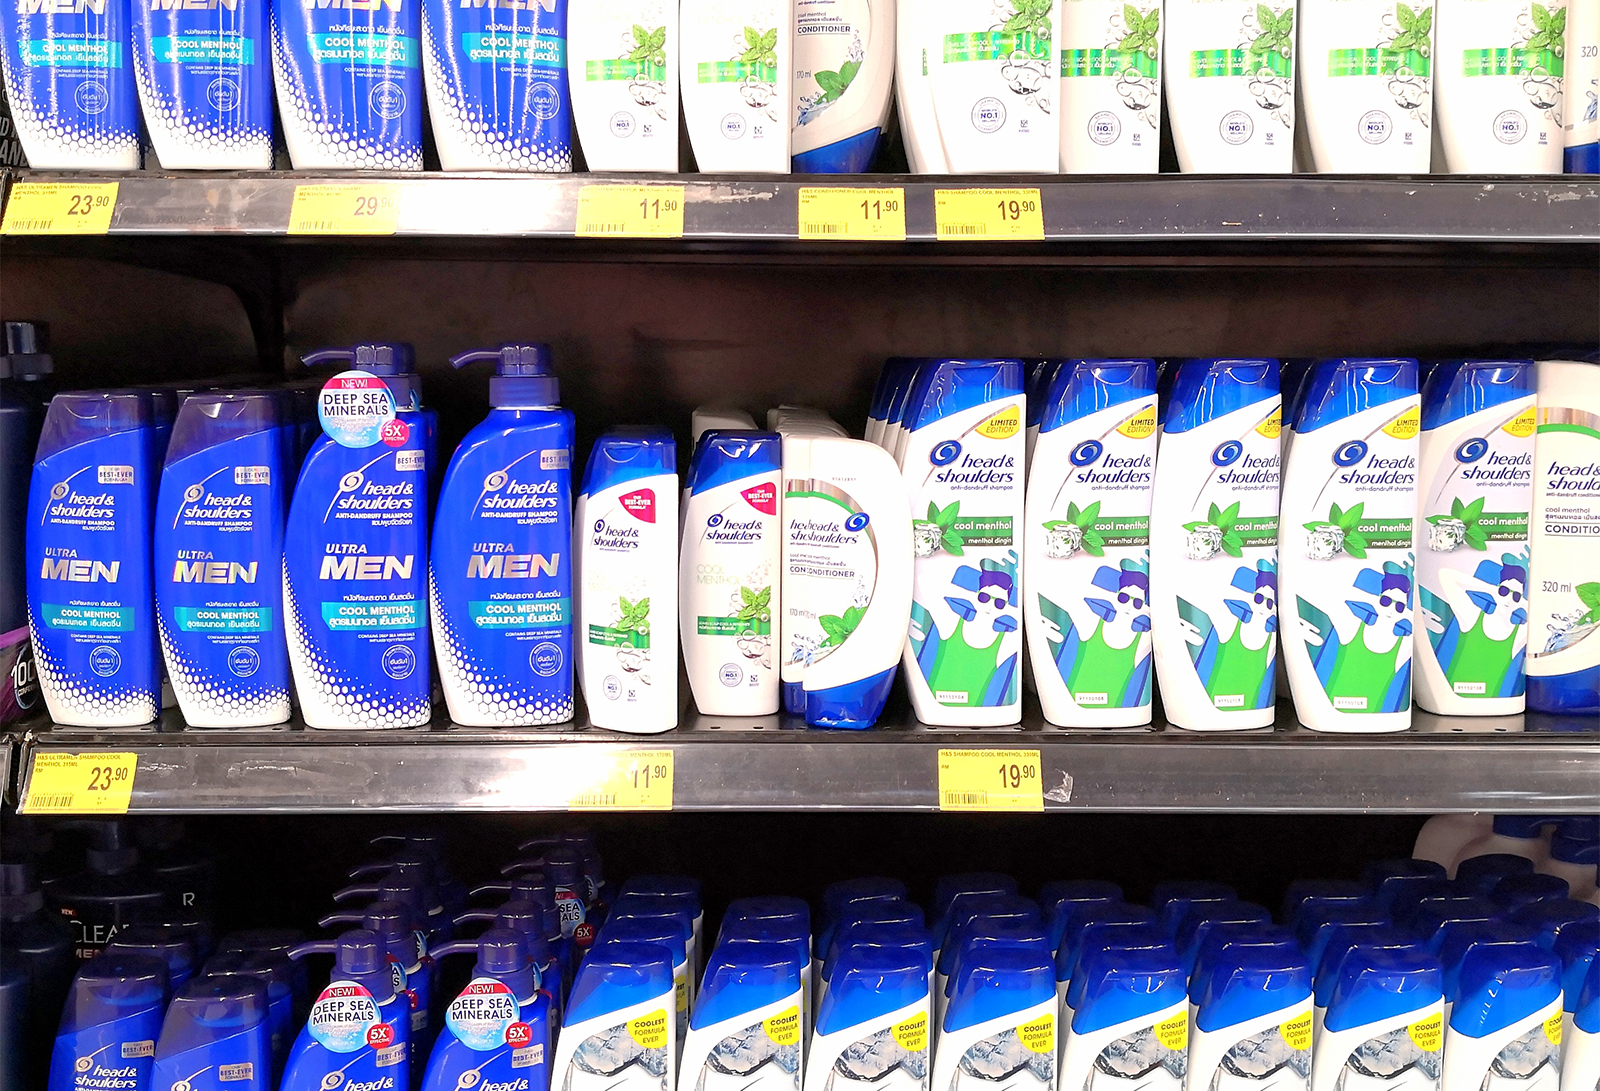 P&G Says They Will Not Rely on Acquisitions to Drive Growth